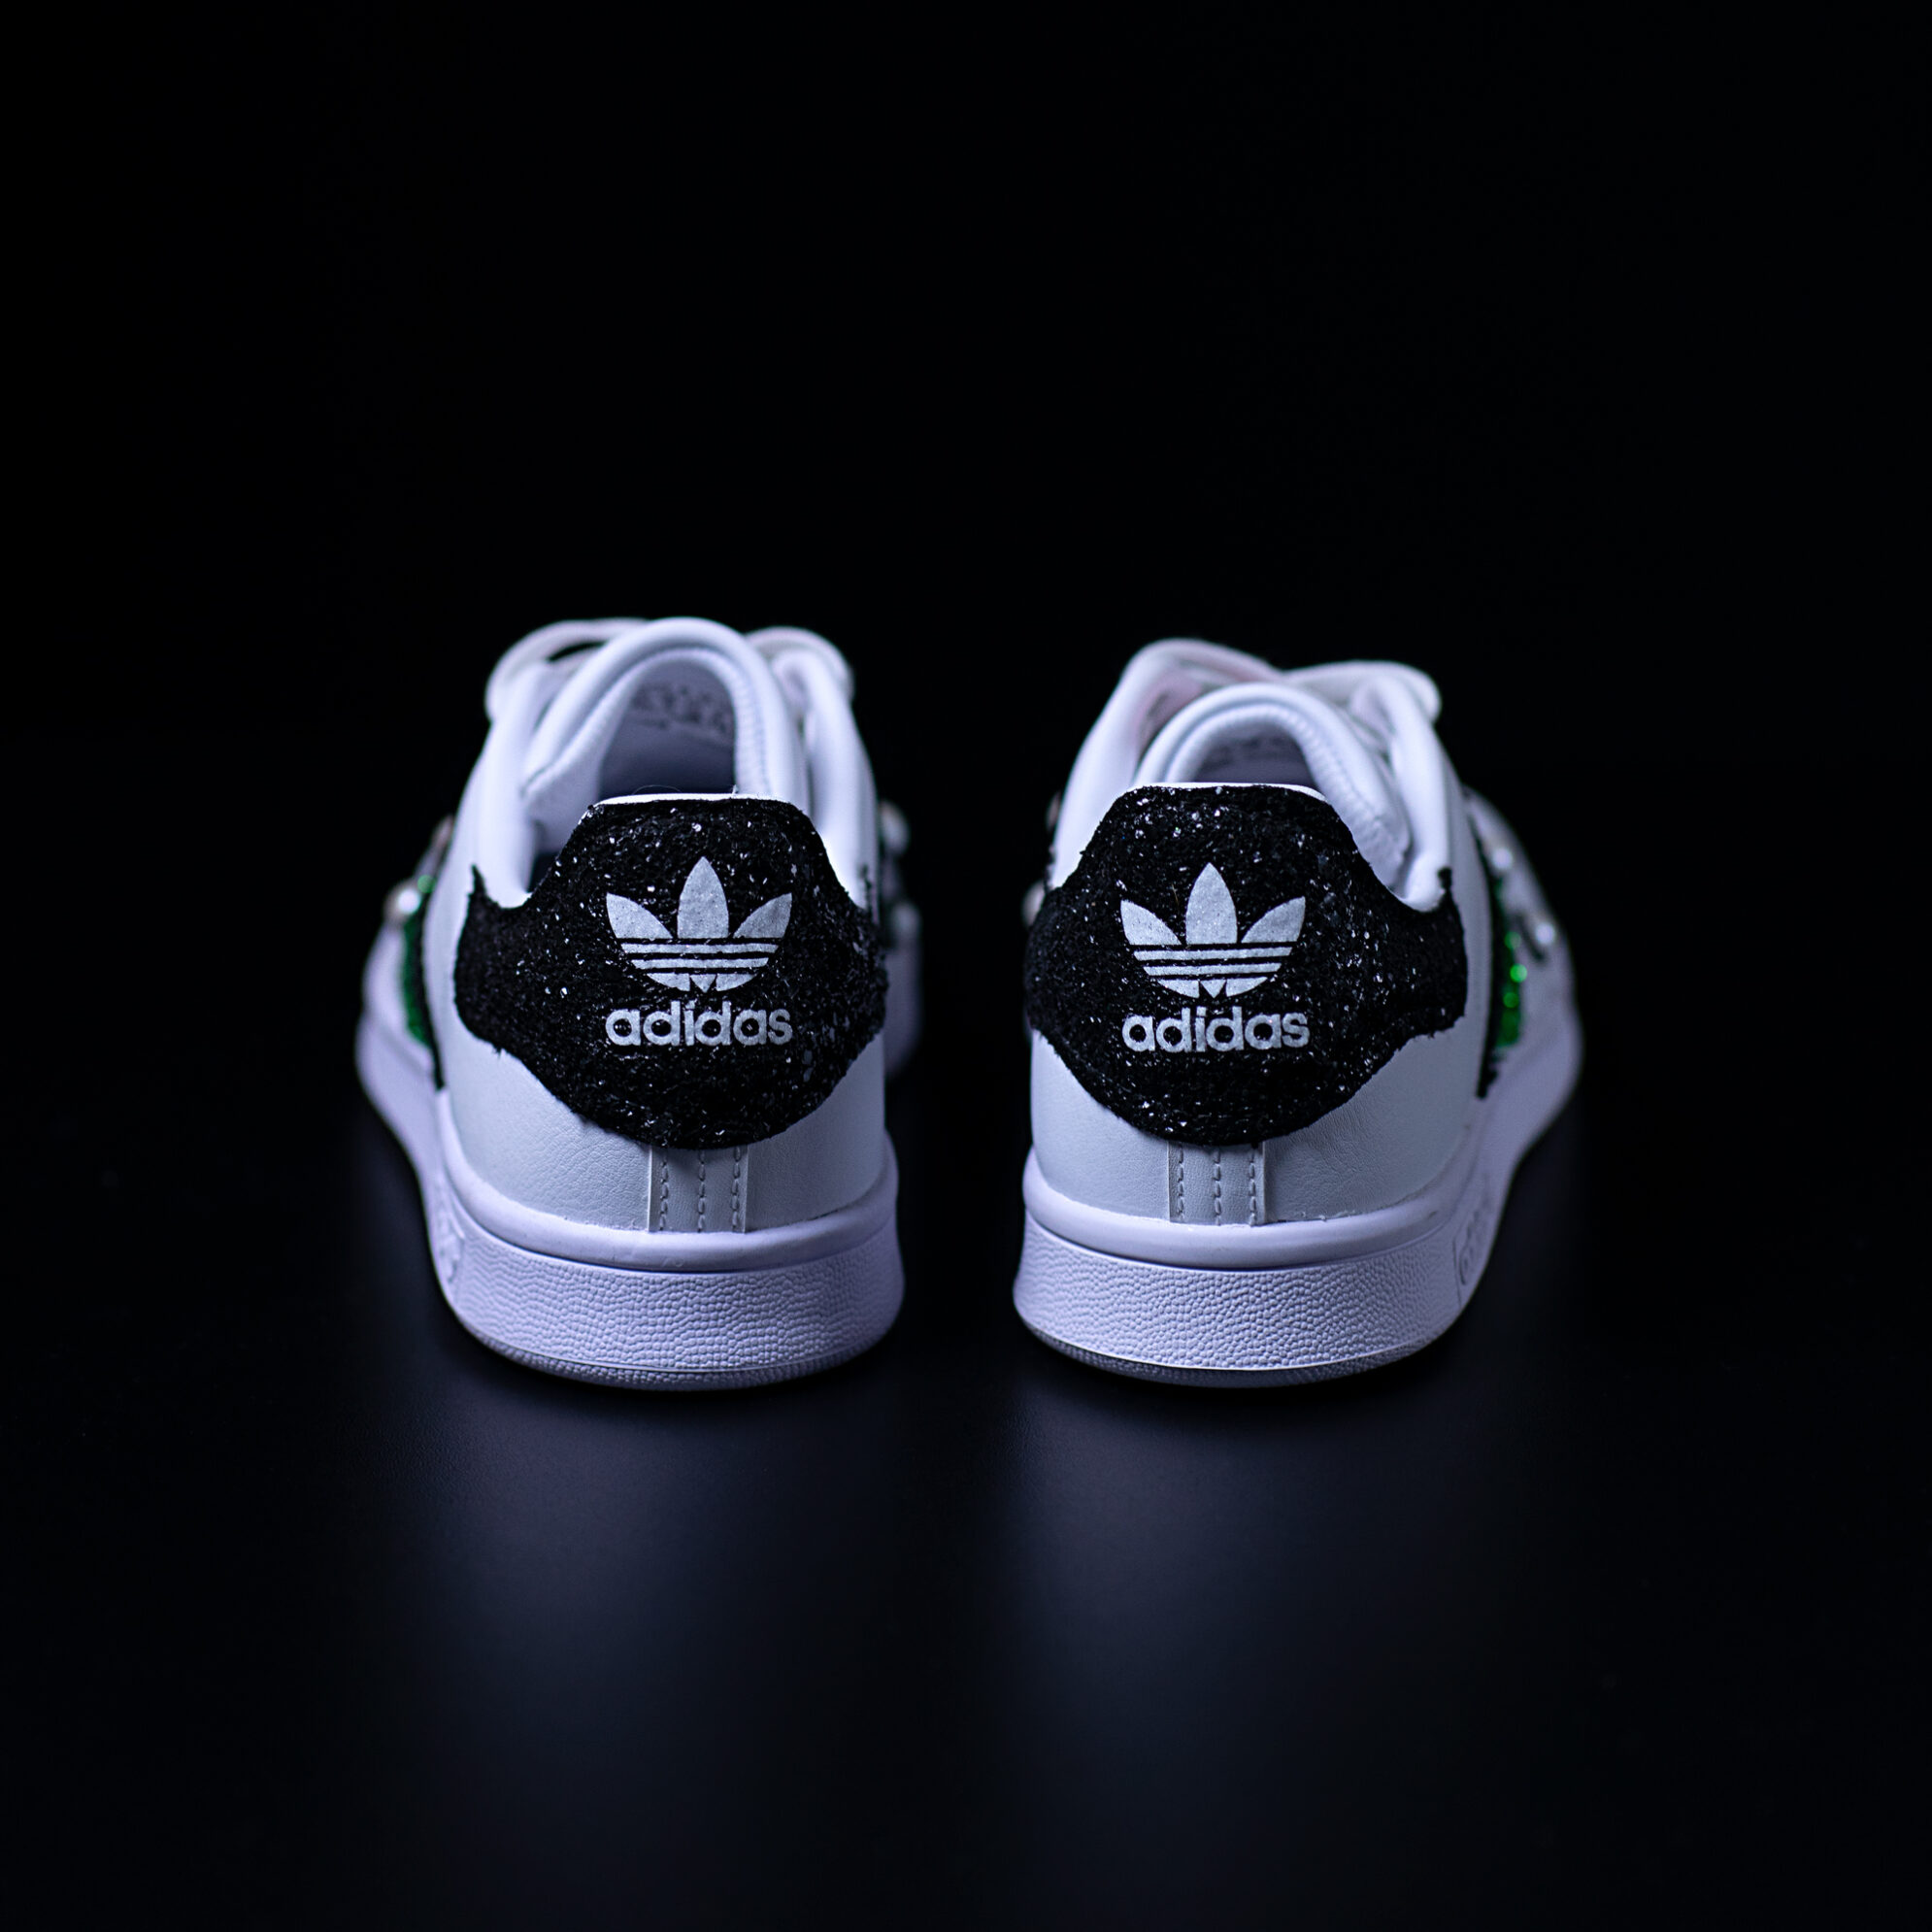 stan smith science fiction adidas sneakers personalizzate da dressed